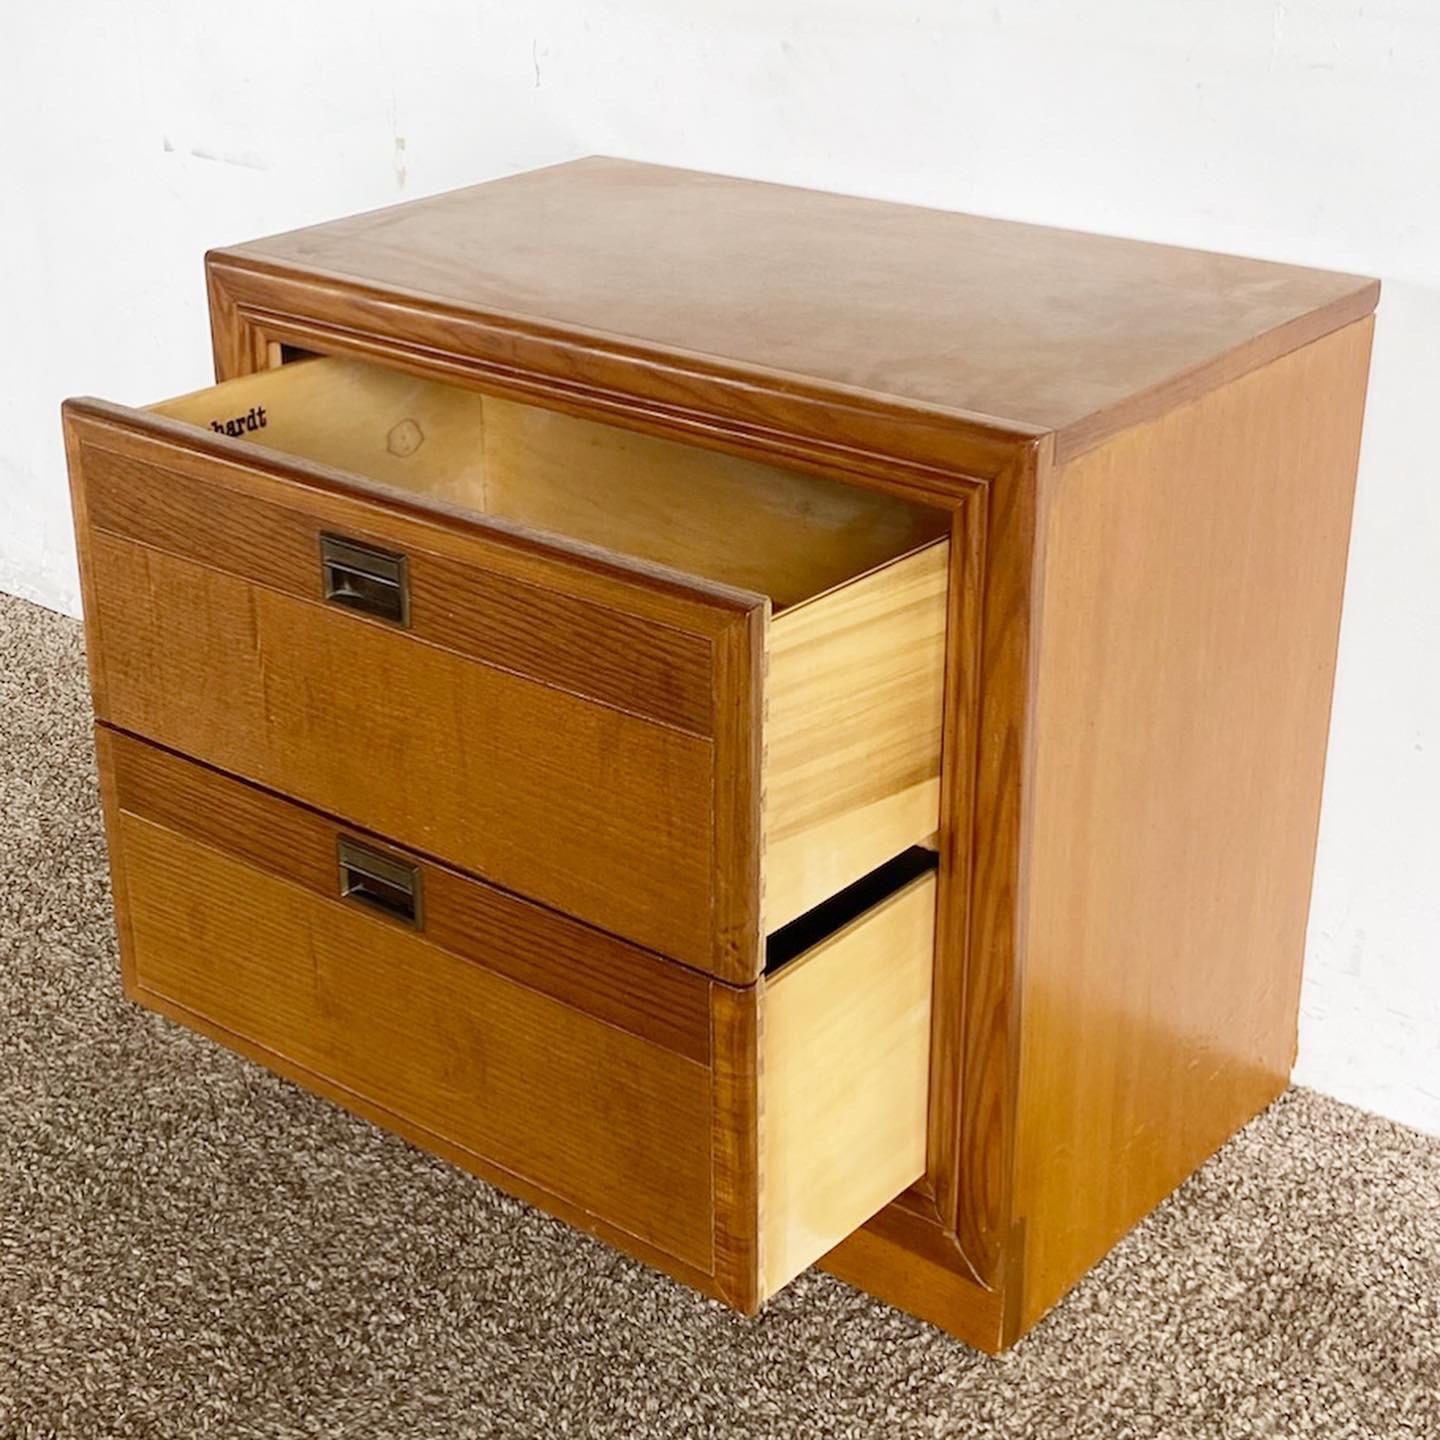 Add vintage charm to your bedroom with our Mid Century Modern Bernhardt Nightstand, offering practical storage and timeless aesthetics.

Incorporates mid-century modern design for a timeless style.
Crafted by renowned manufacturer,